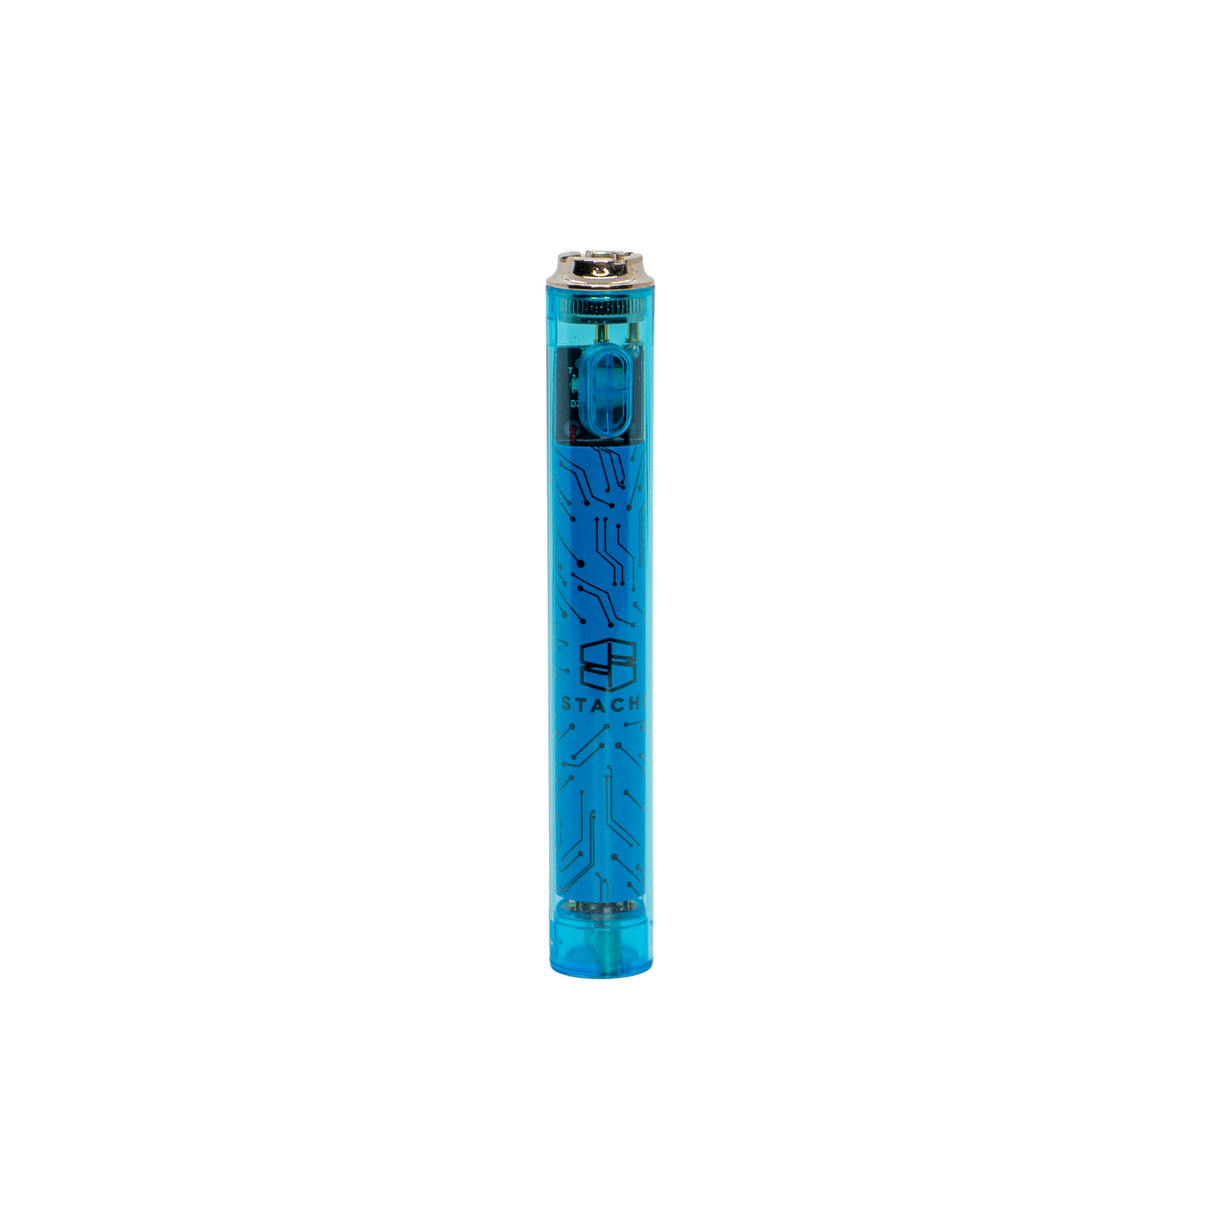 Stacheproductswholesale Transparent Battery Front View with Blue Accents